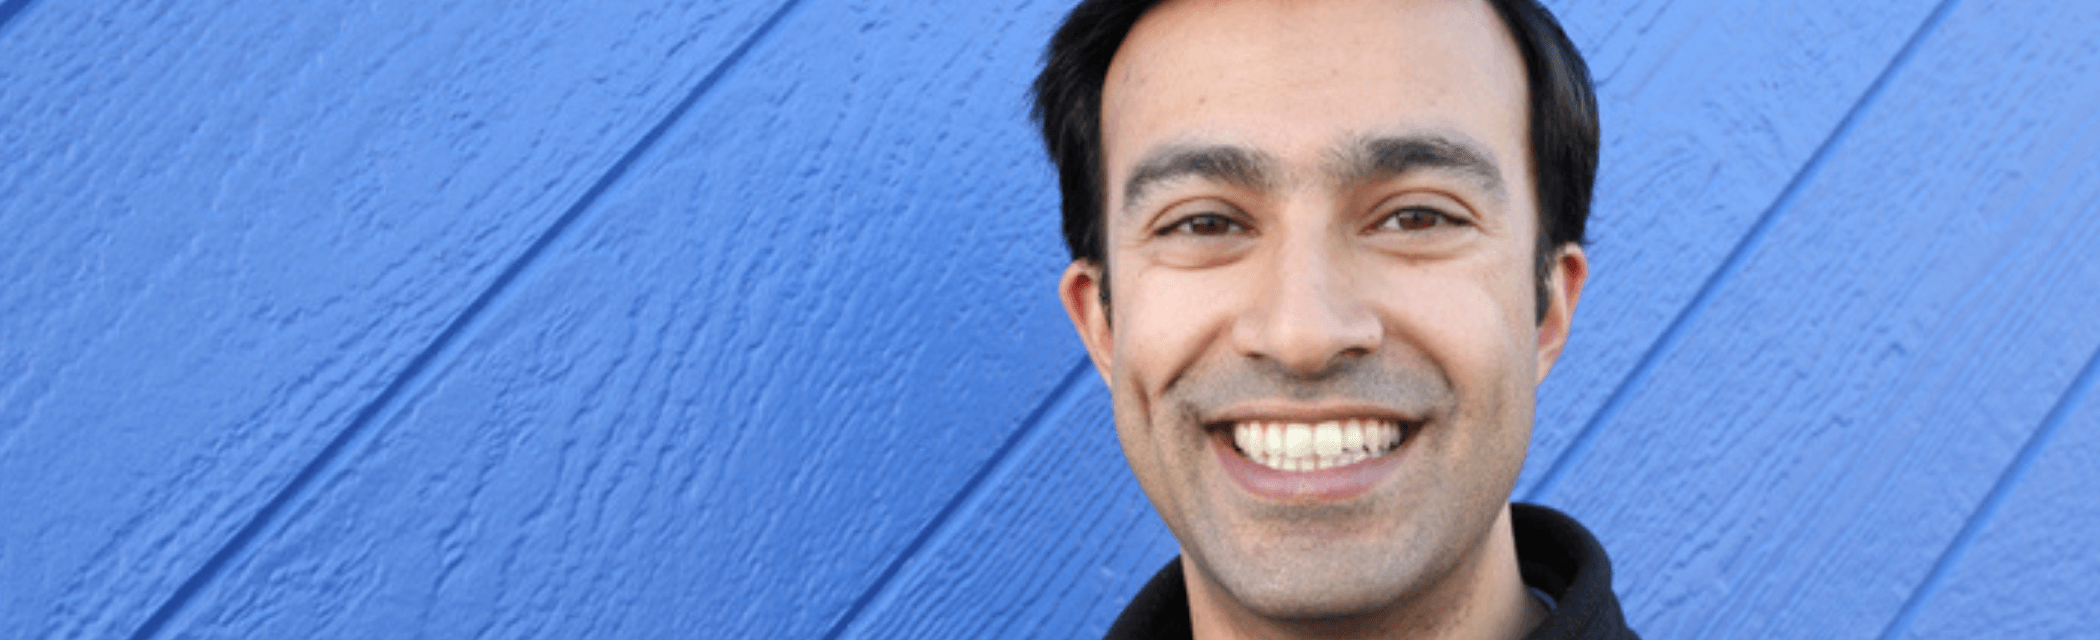 Sachin Rekhi explains how continuous feedback loops lead to better products